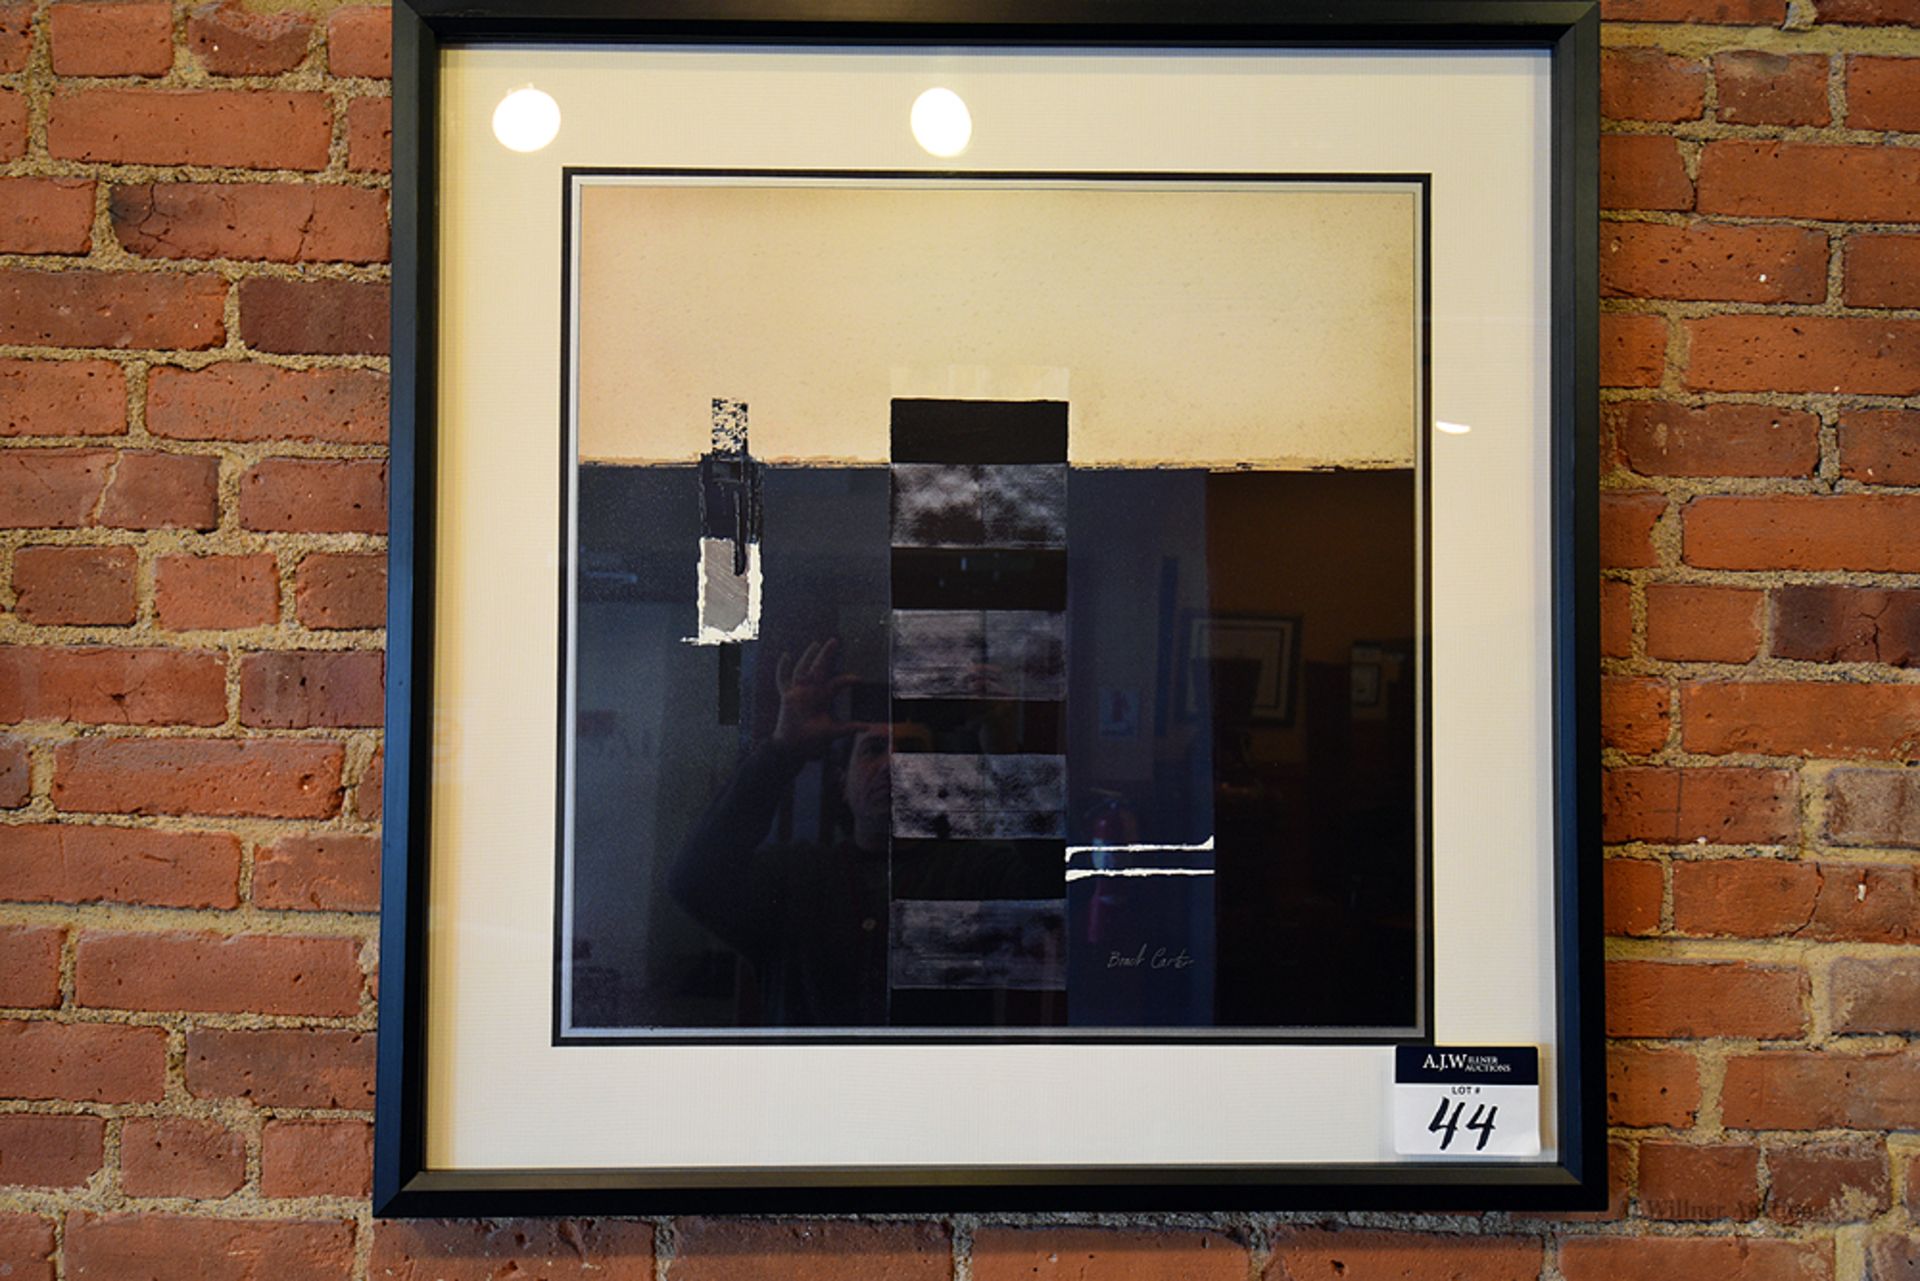 Artistic Photo, Framed, 34" x 34" - Image 9 of 9